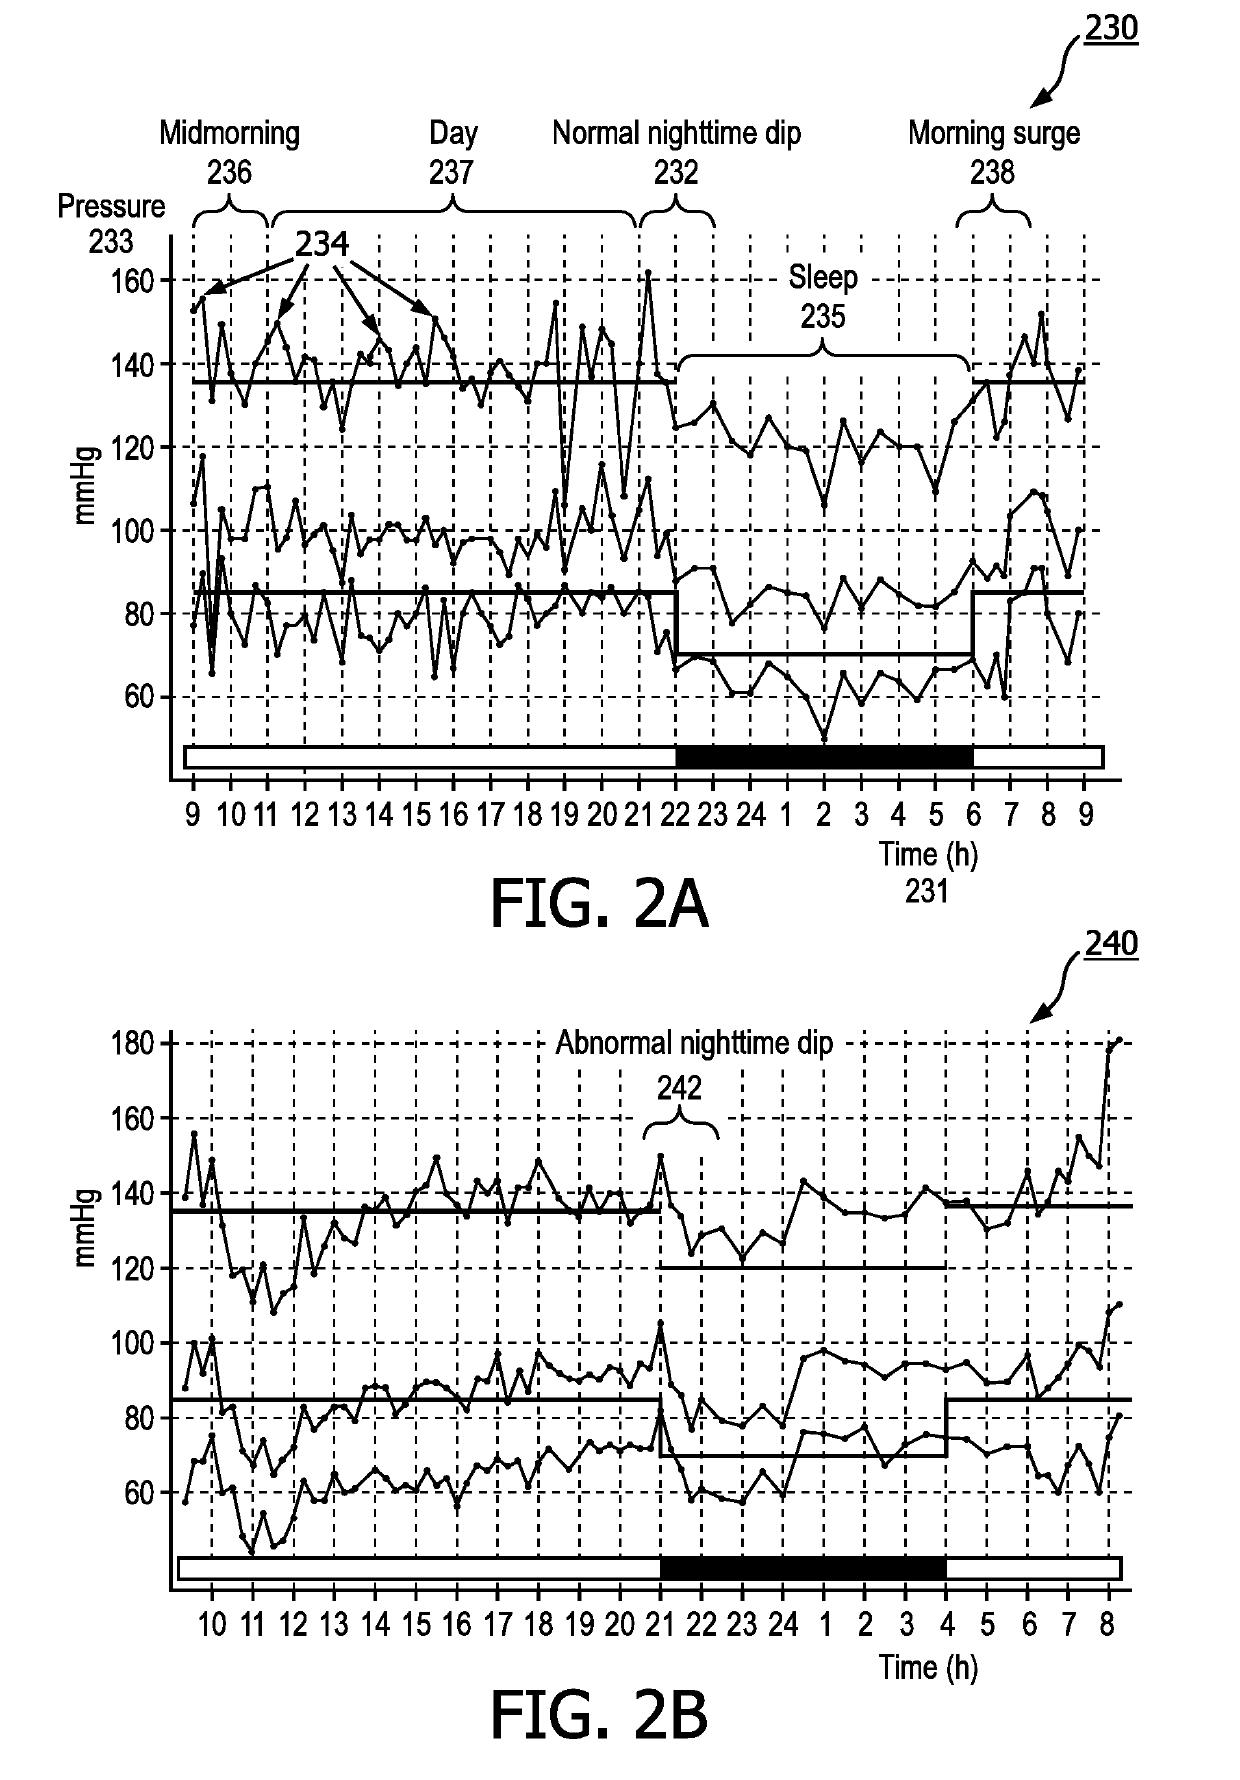 System and method for non-invasive determination of blood pressure dip based on trained prediction models